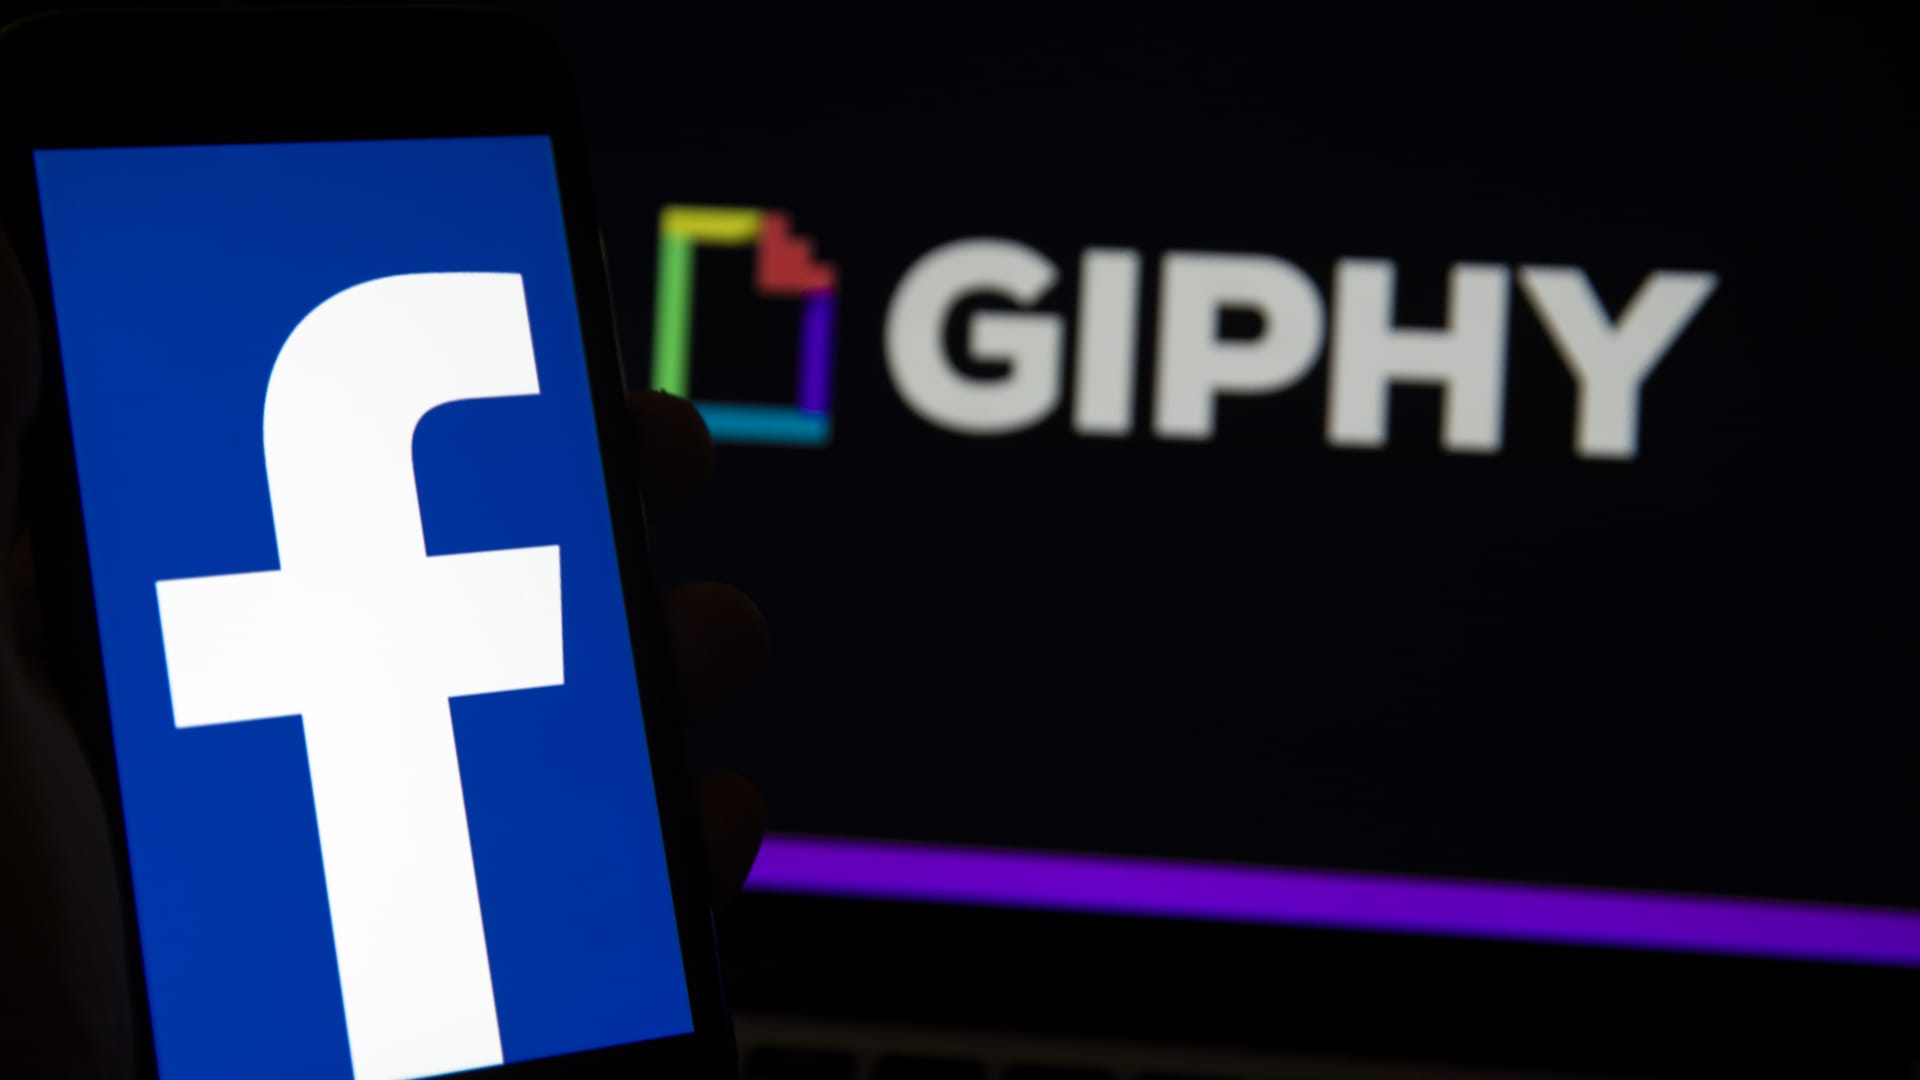 Meta sells Giphy to Shutterstock at a loss in a $53 million deal